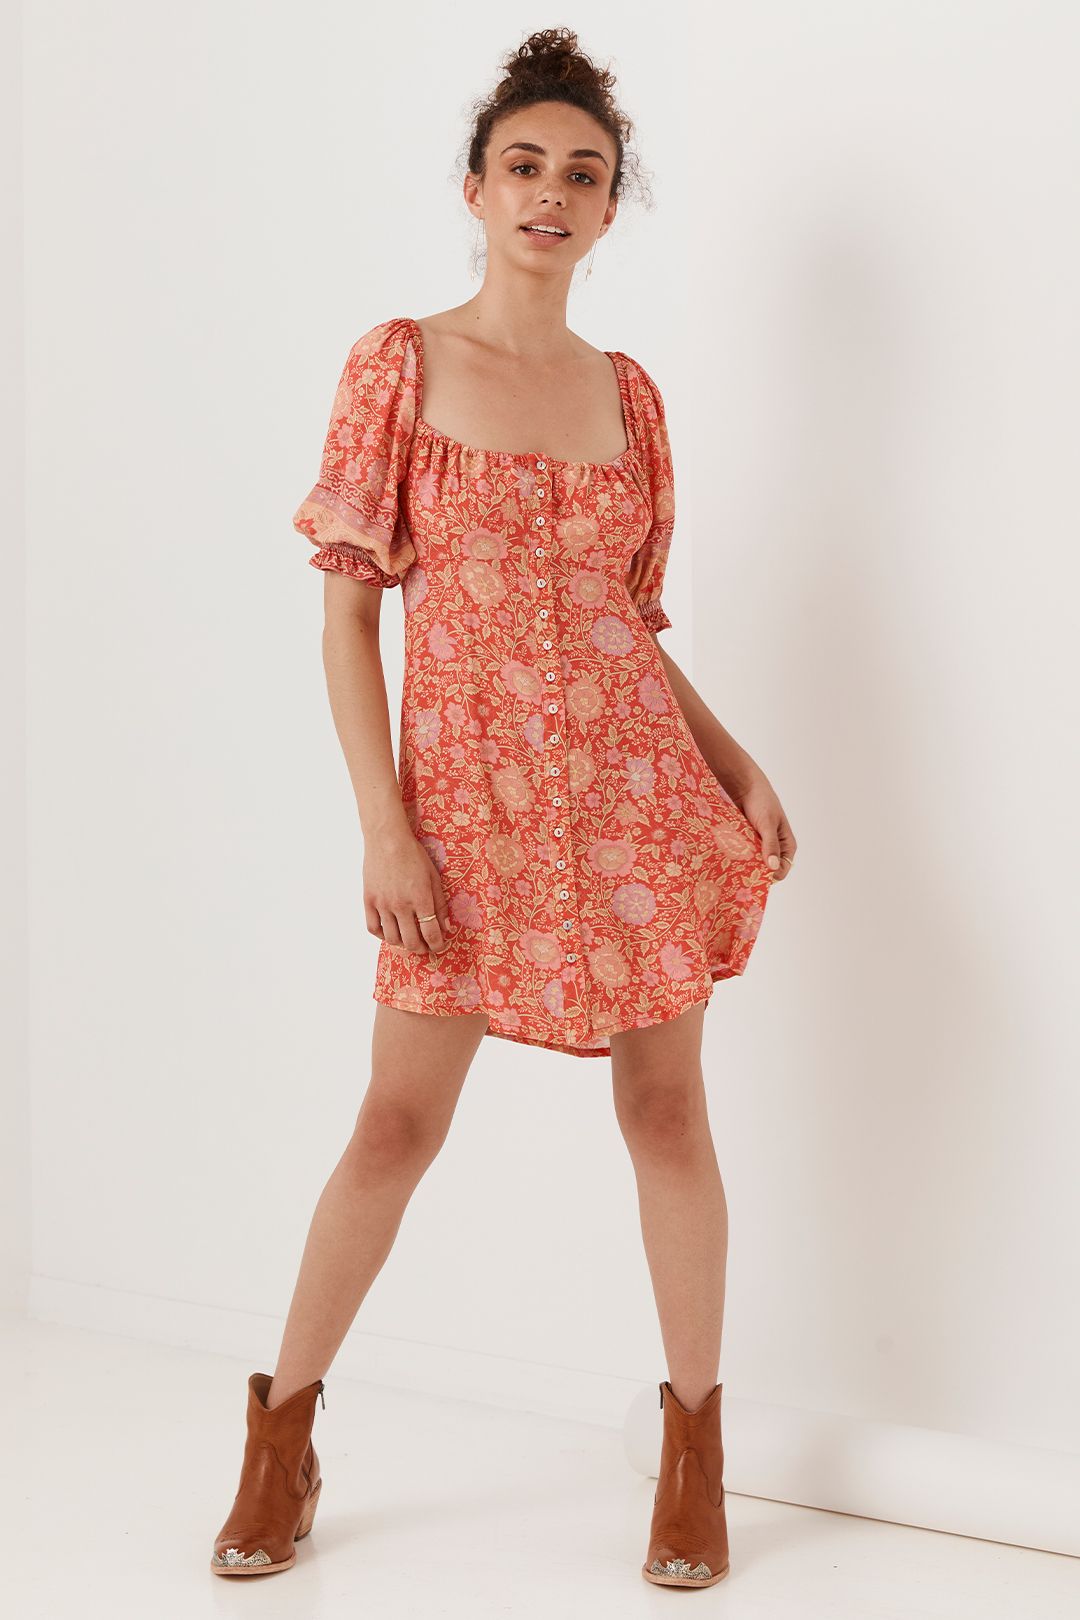 Spell Love Story Mini Dress Red Coral Floral Straight Neckline